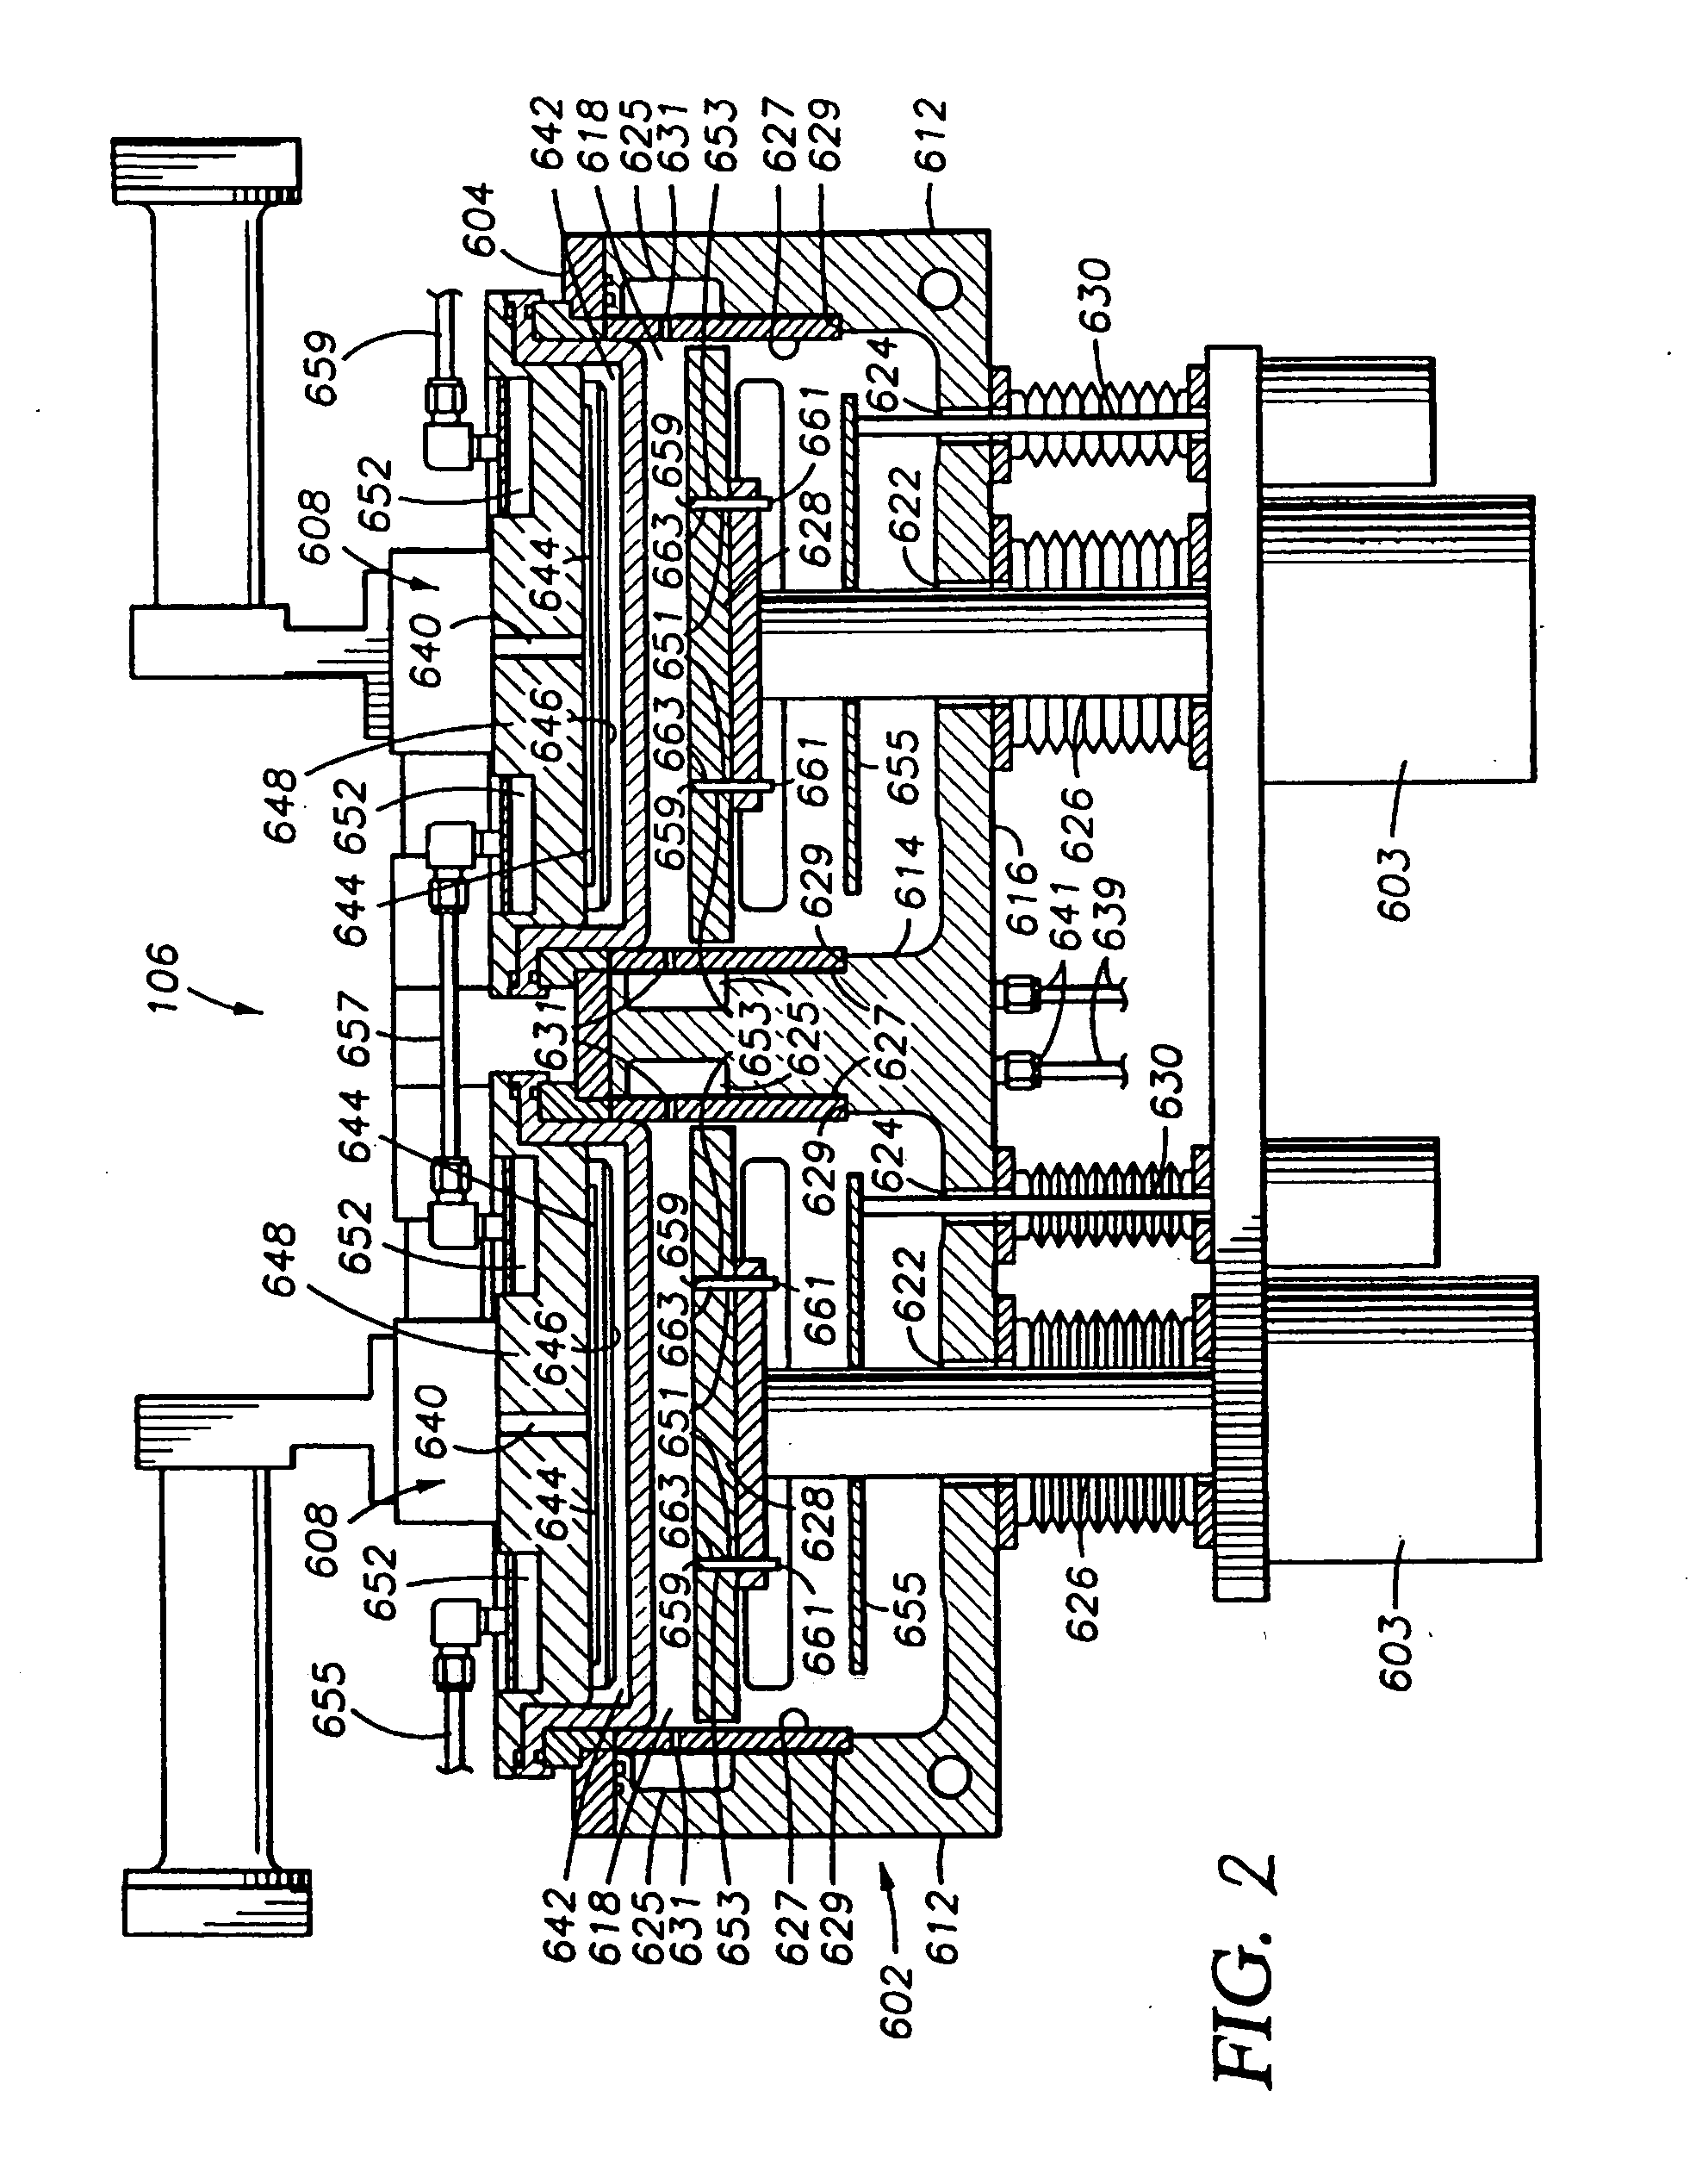 Reduction of reactive gas attack on substrate heater